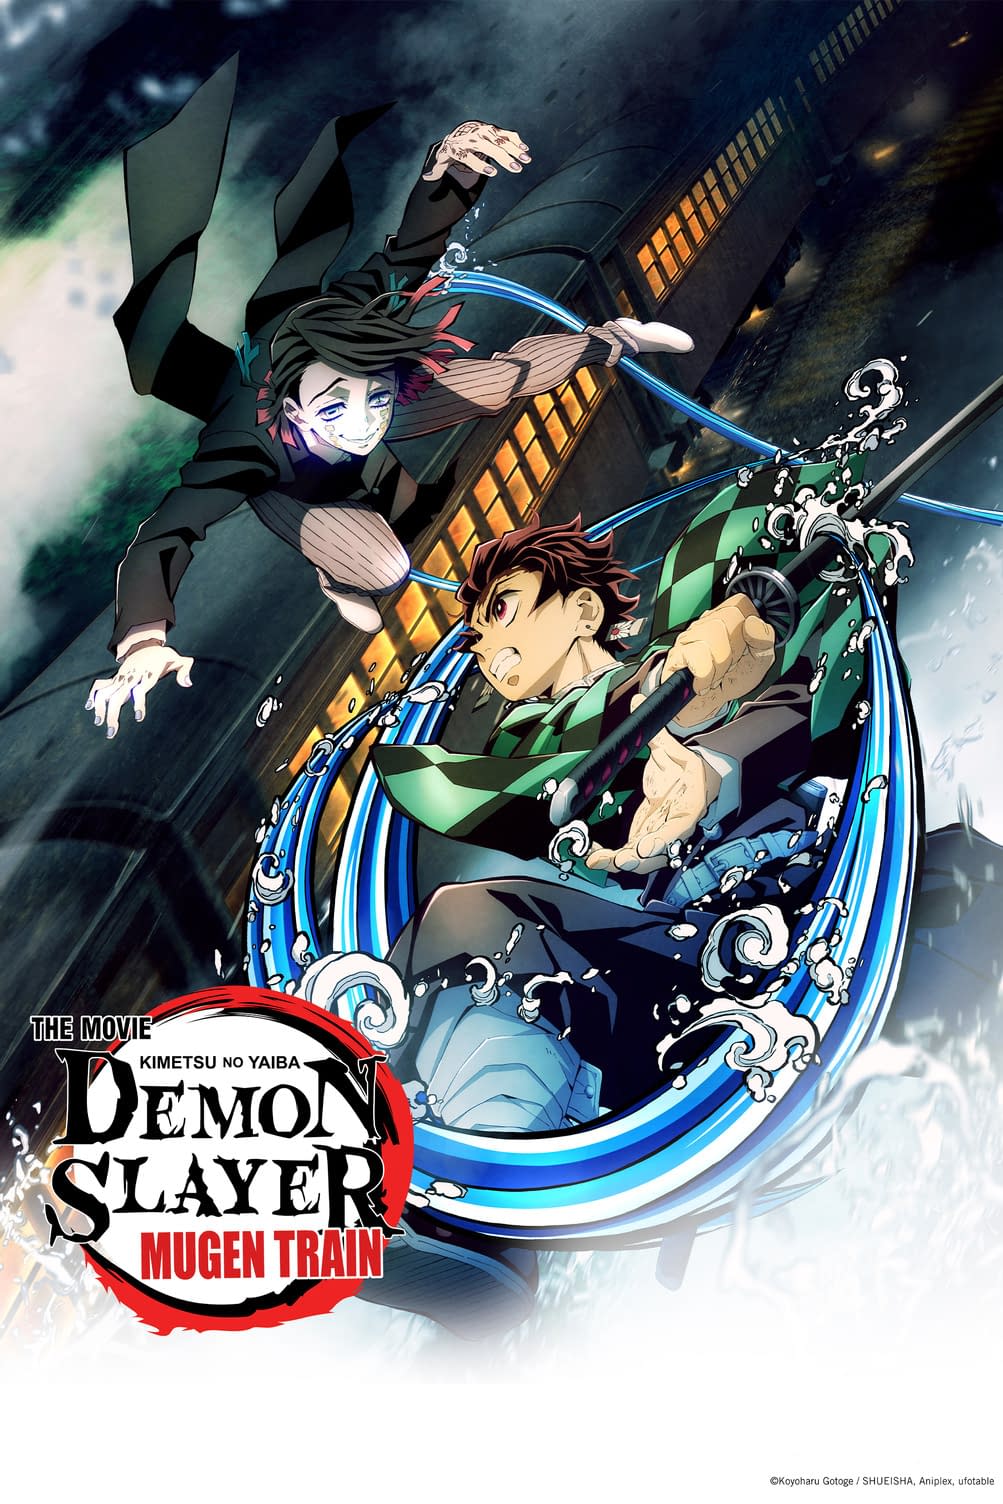 Demon Slayer Anime Series and Movie Now Streaming on Crunchyroll